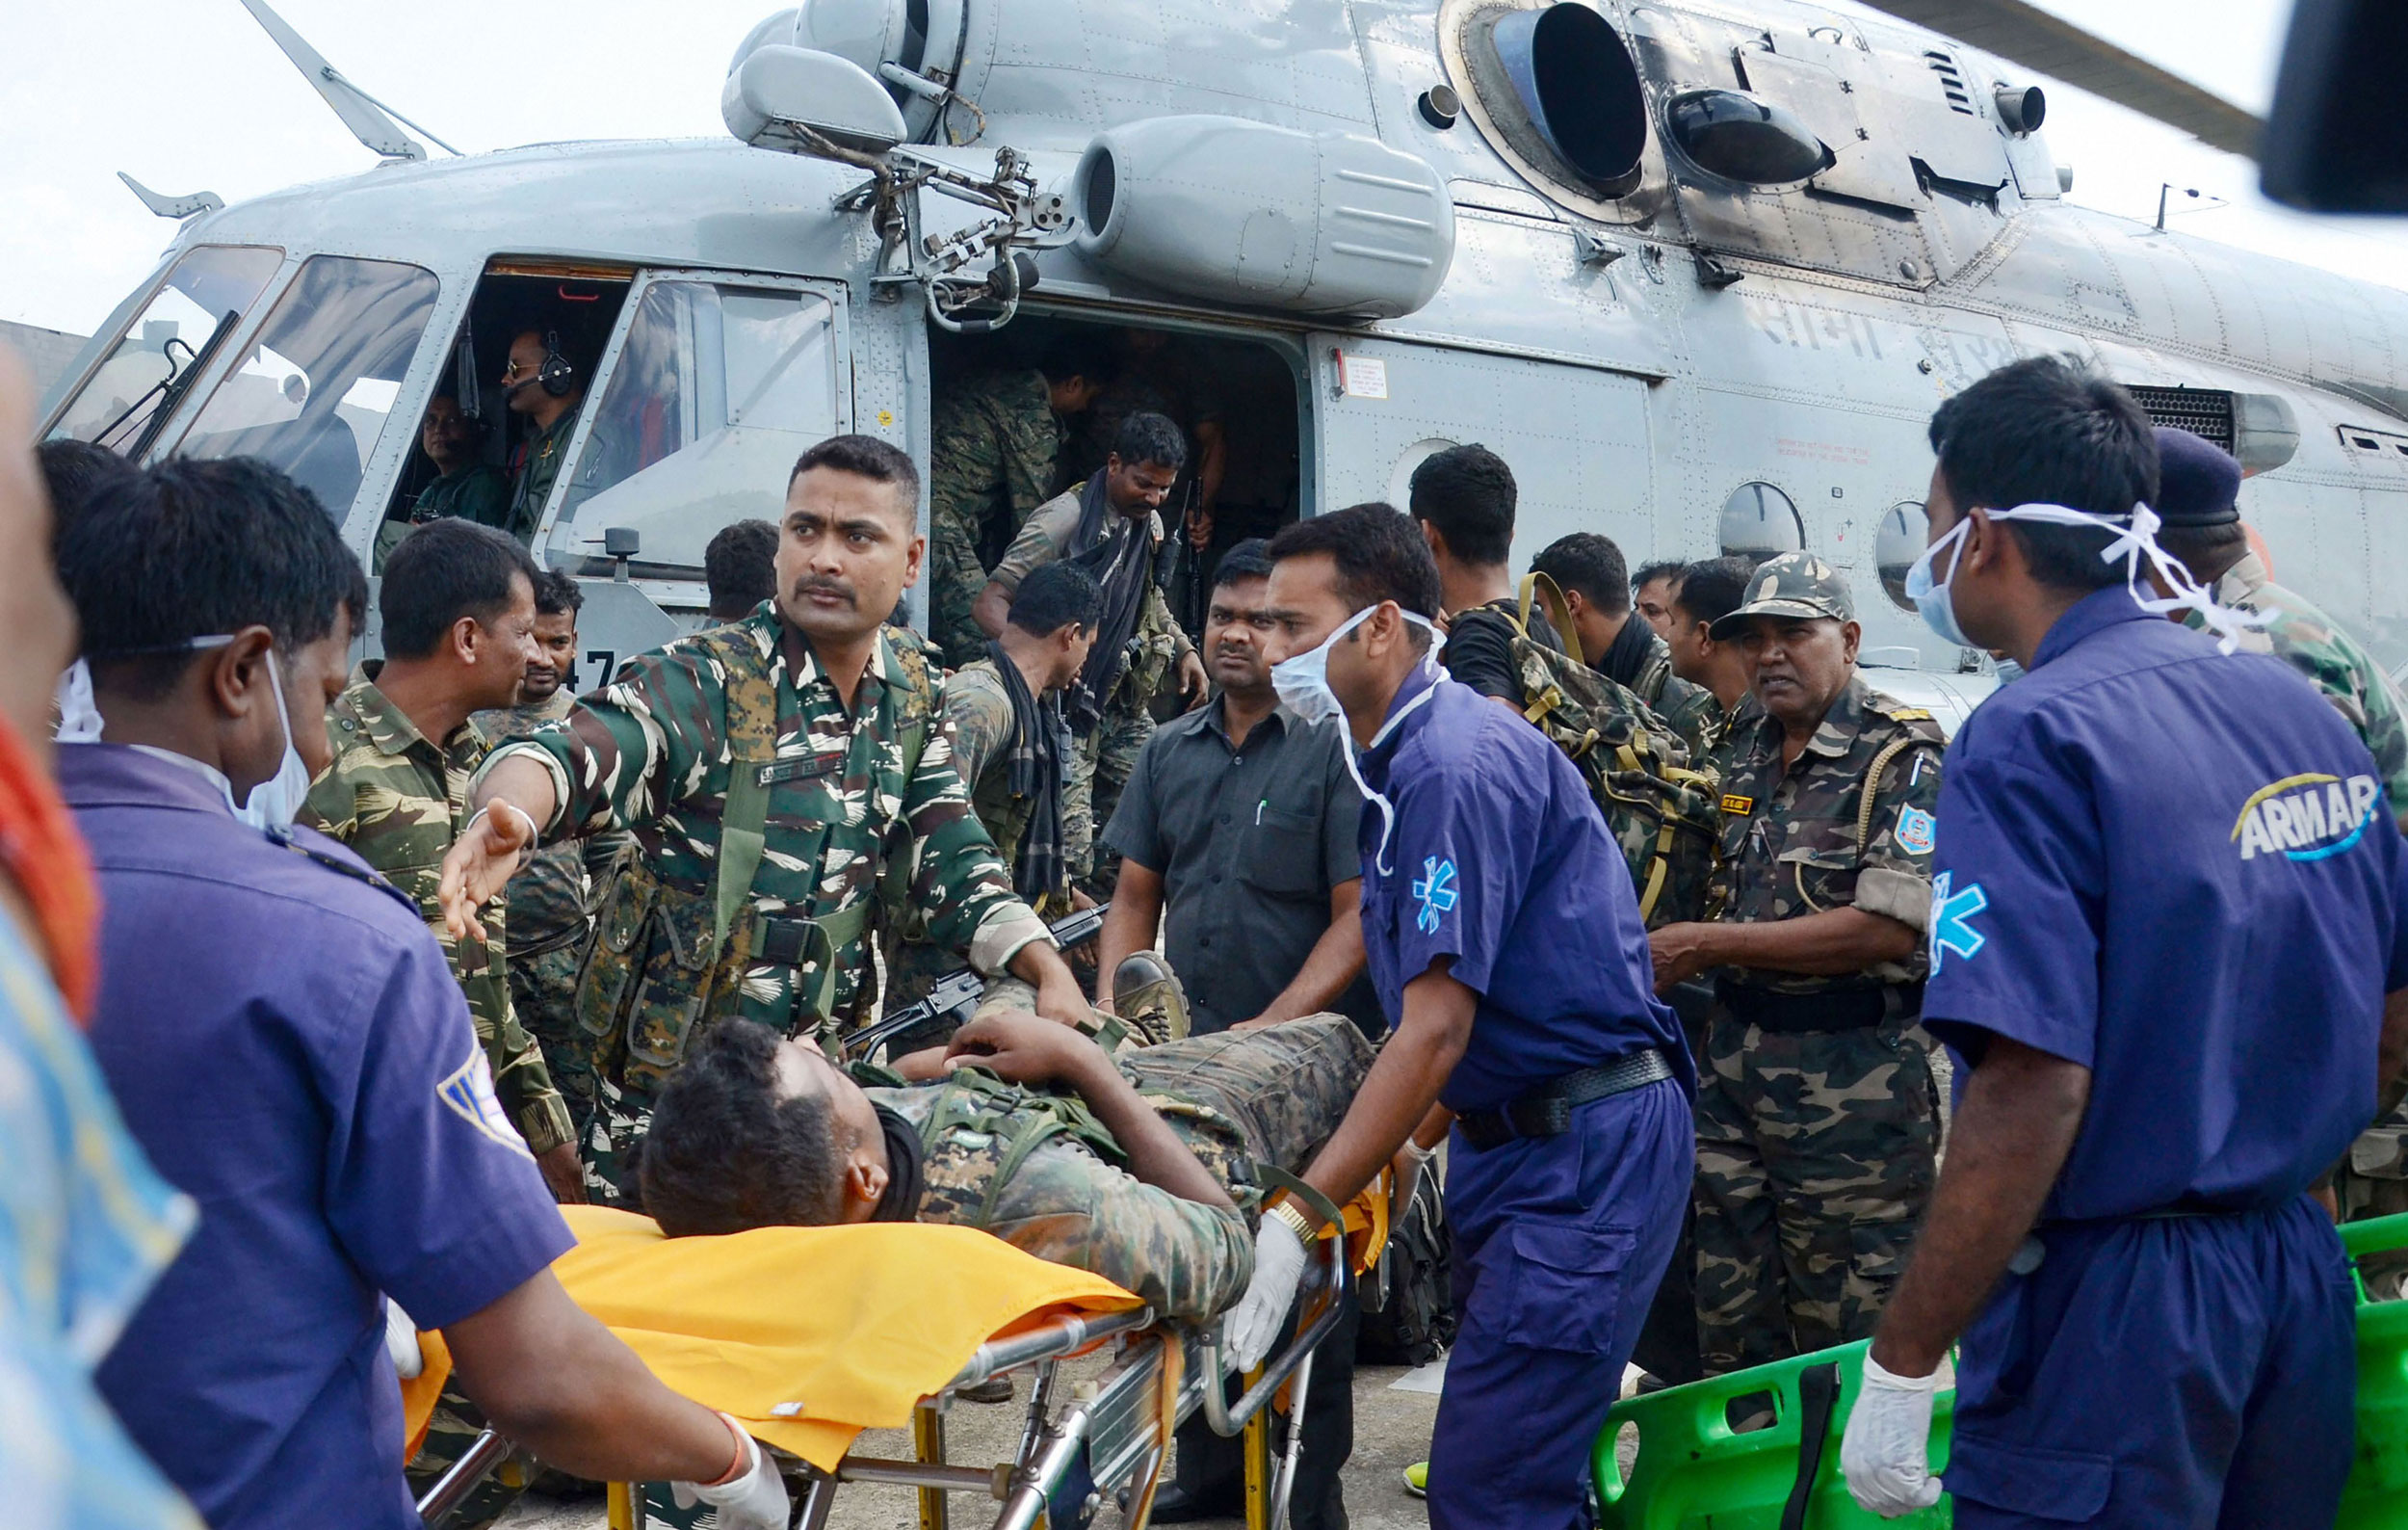 The injured troops, 13 belonging to the CRPF's CoBRA battalion and the rest of the Jharkhand Armed Police and the district police, were airlifted to Ranchi.

